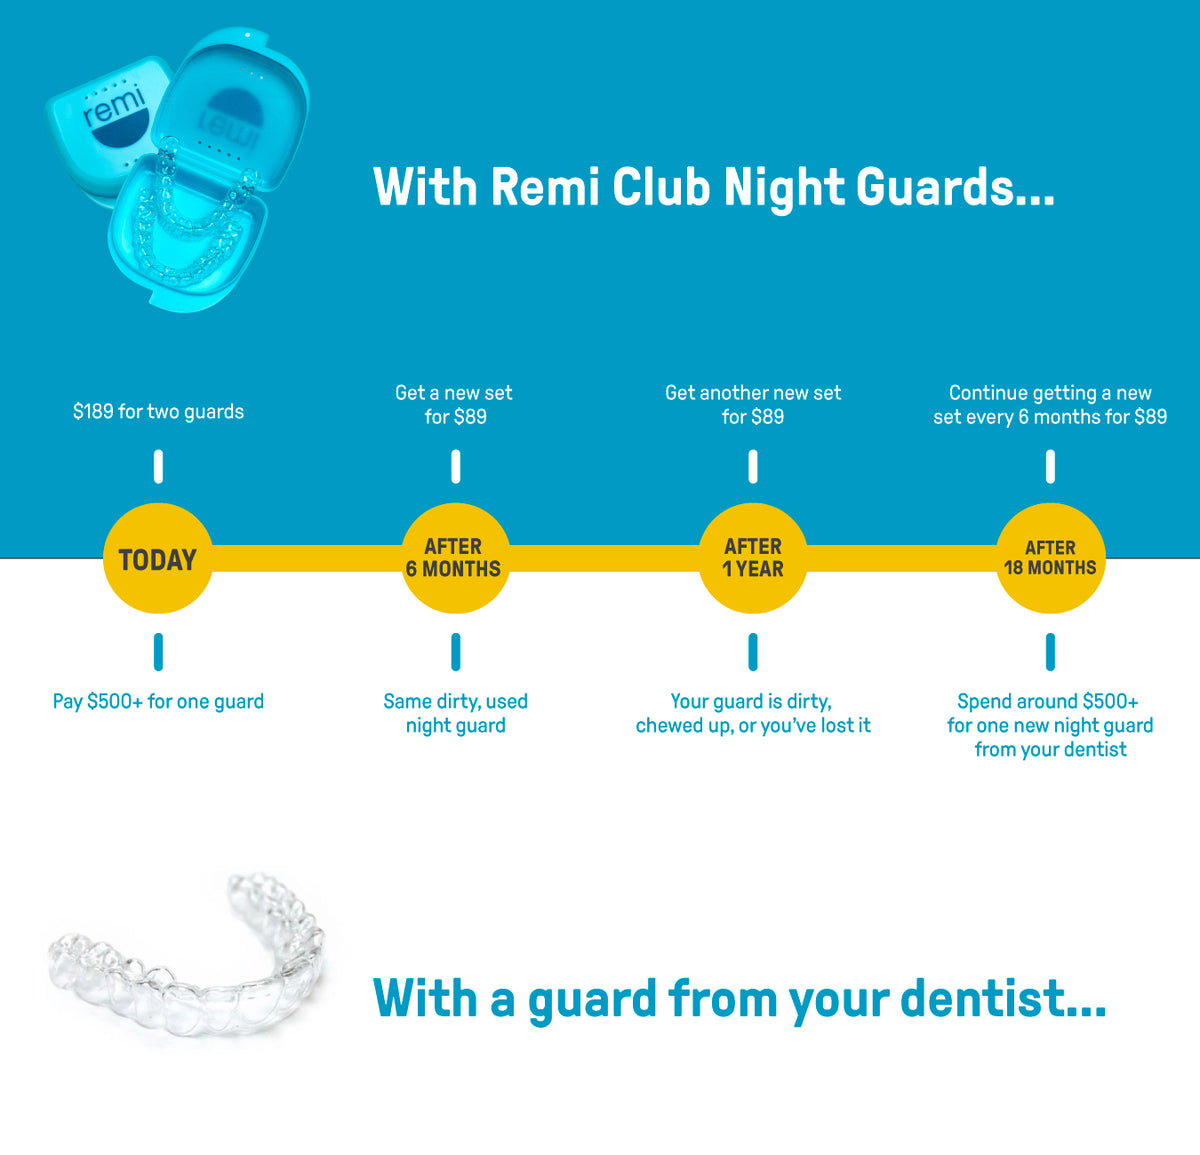 Infographic comparing costs and benefits of Custom Night Guards versus traditional dental night guards over an 18-month period, highlighting the dental-grade quality for teeth grinding prevention.